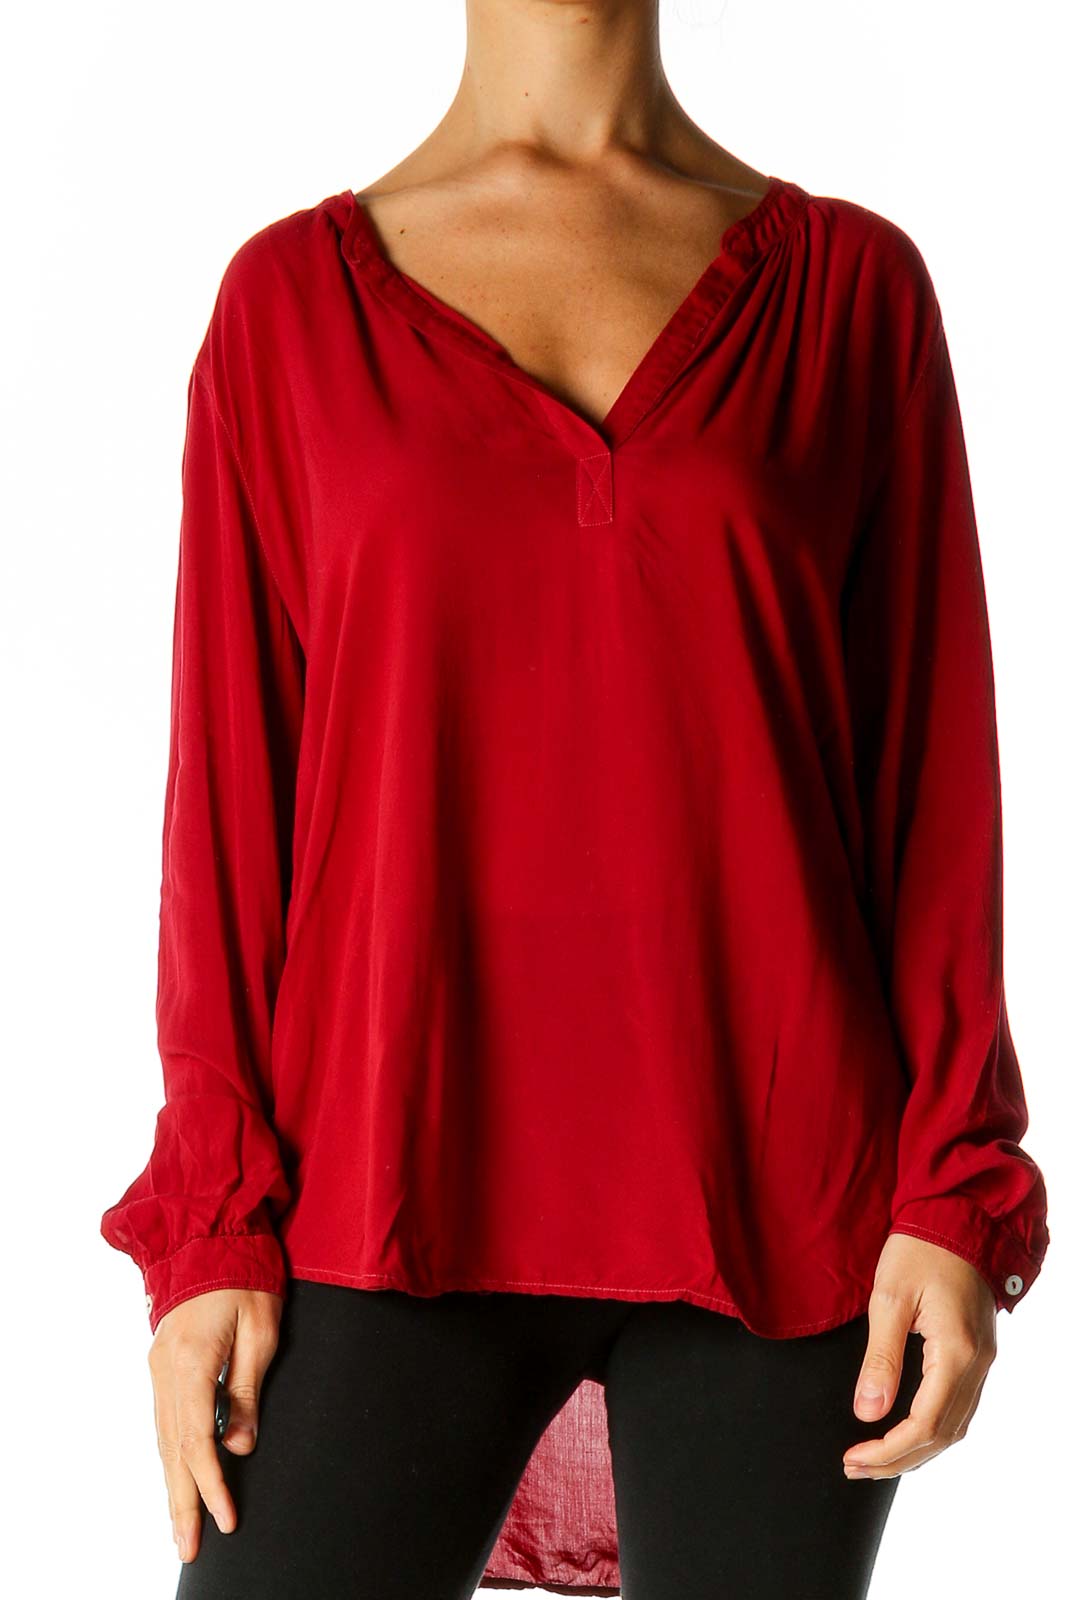 Red Solid Casual Shirt Front